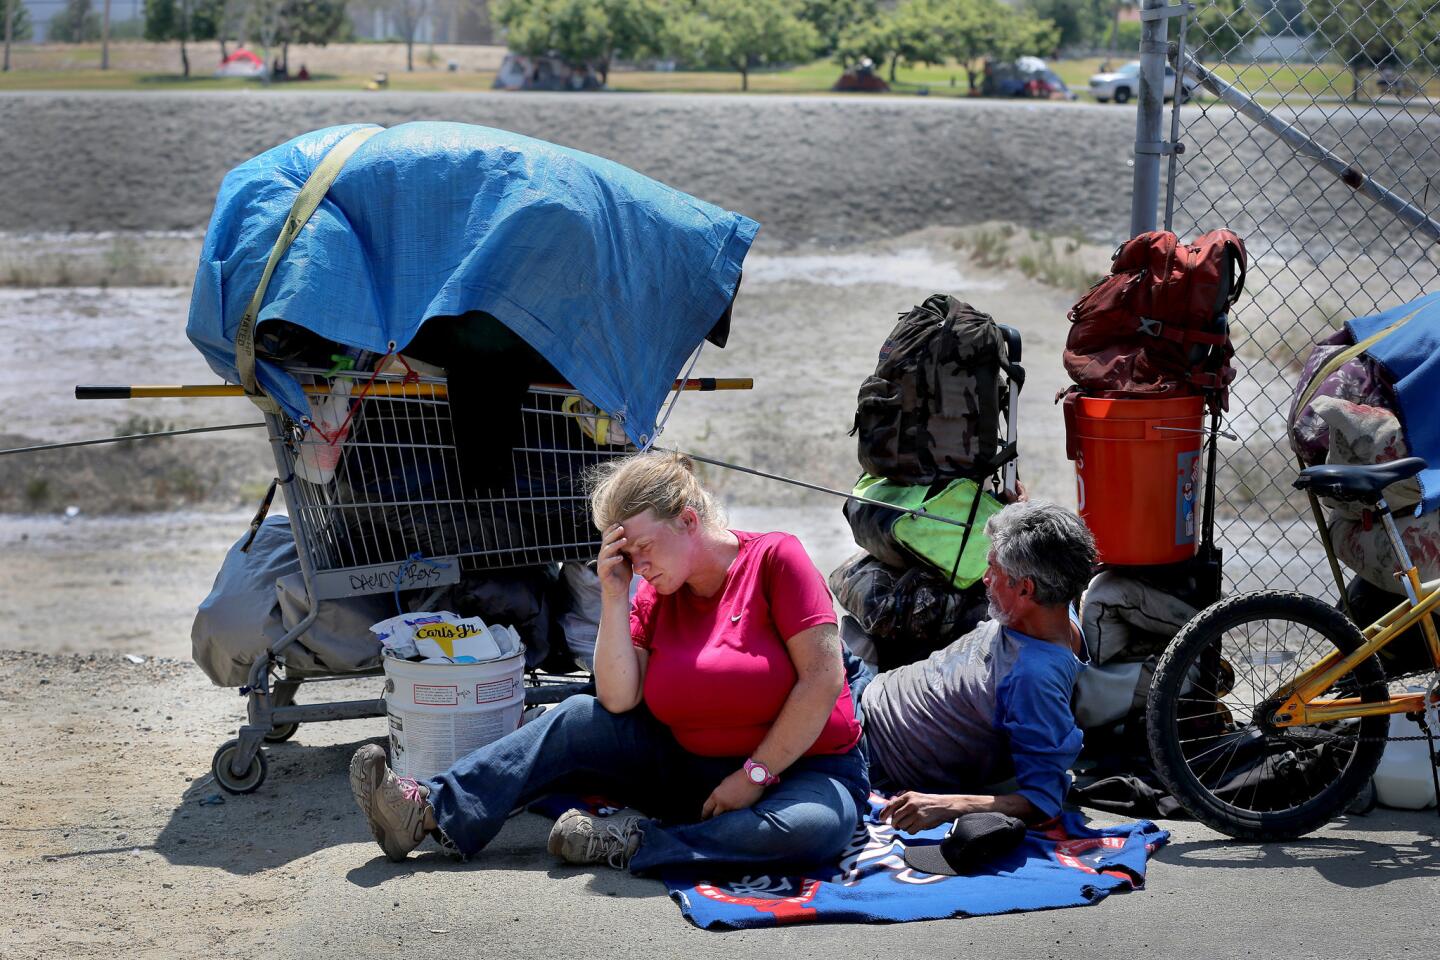 Jennifer Herbst, 31, who is two months pregnant, and fiance John Arispe, 62, are overwhelmed by heat and exhaustion after being evicted Monday from their encampment next to the Honda Center in Anaheim. The couple, who have been homeless for a month, were waiting for homeless outreach volunteers and a moving truck donated by The Rock Anaheim church to move their belongings across the Santa Ana River.